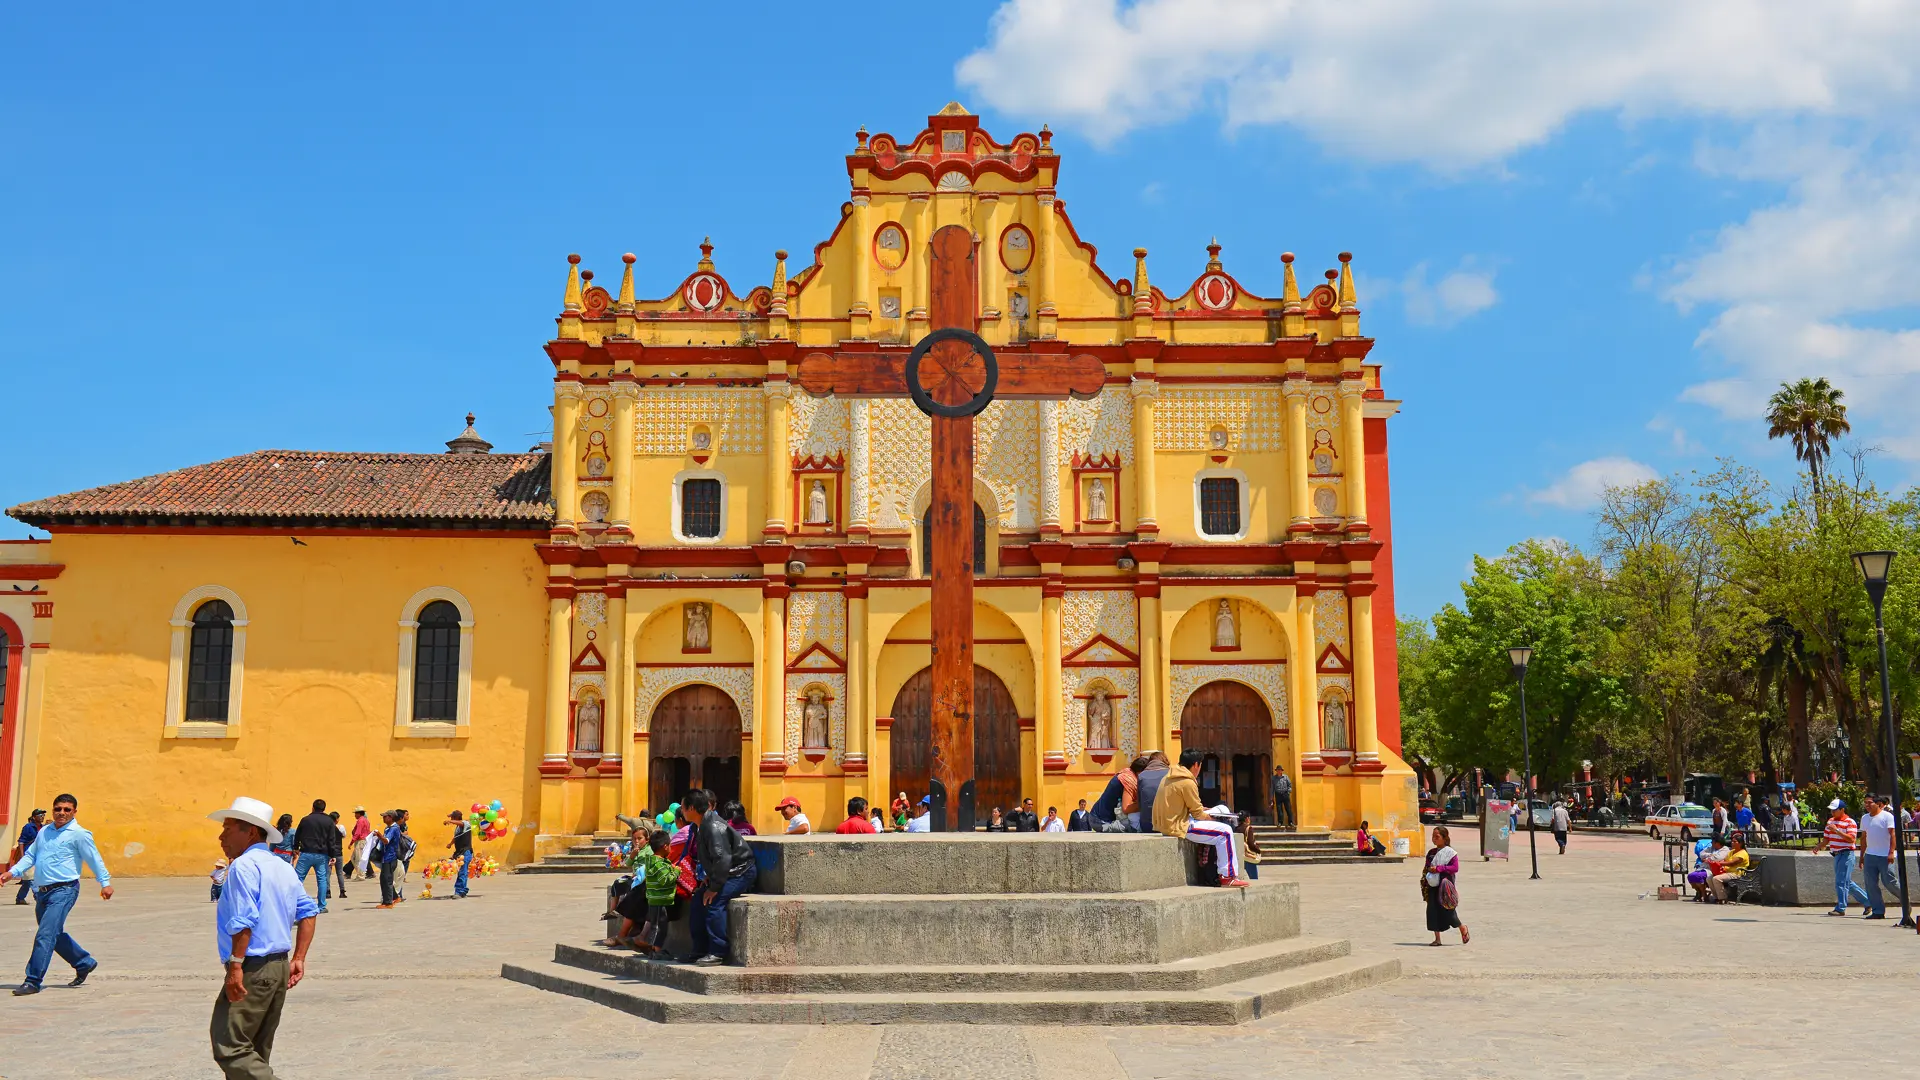 shutterstock_555456844 SAN CRISTOBAL DE LAS CASAS, MEXICO - MARCH 12 2013 The main square of the city with its colorful Catedral.jpg